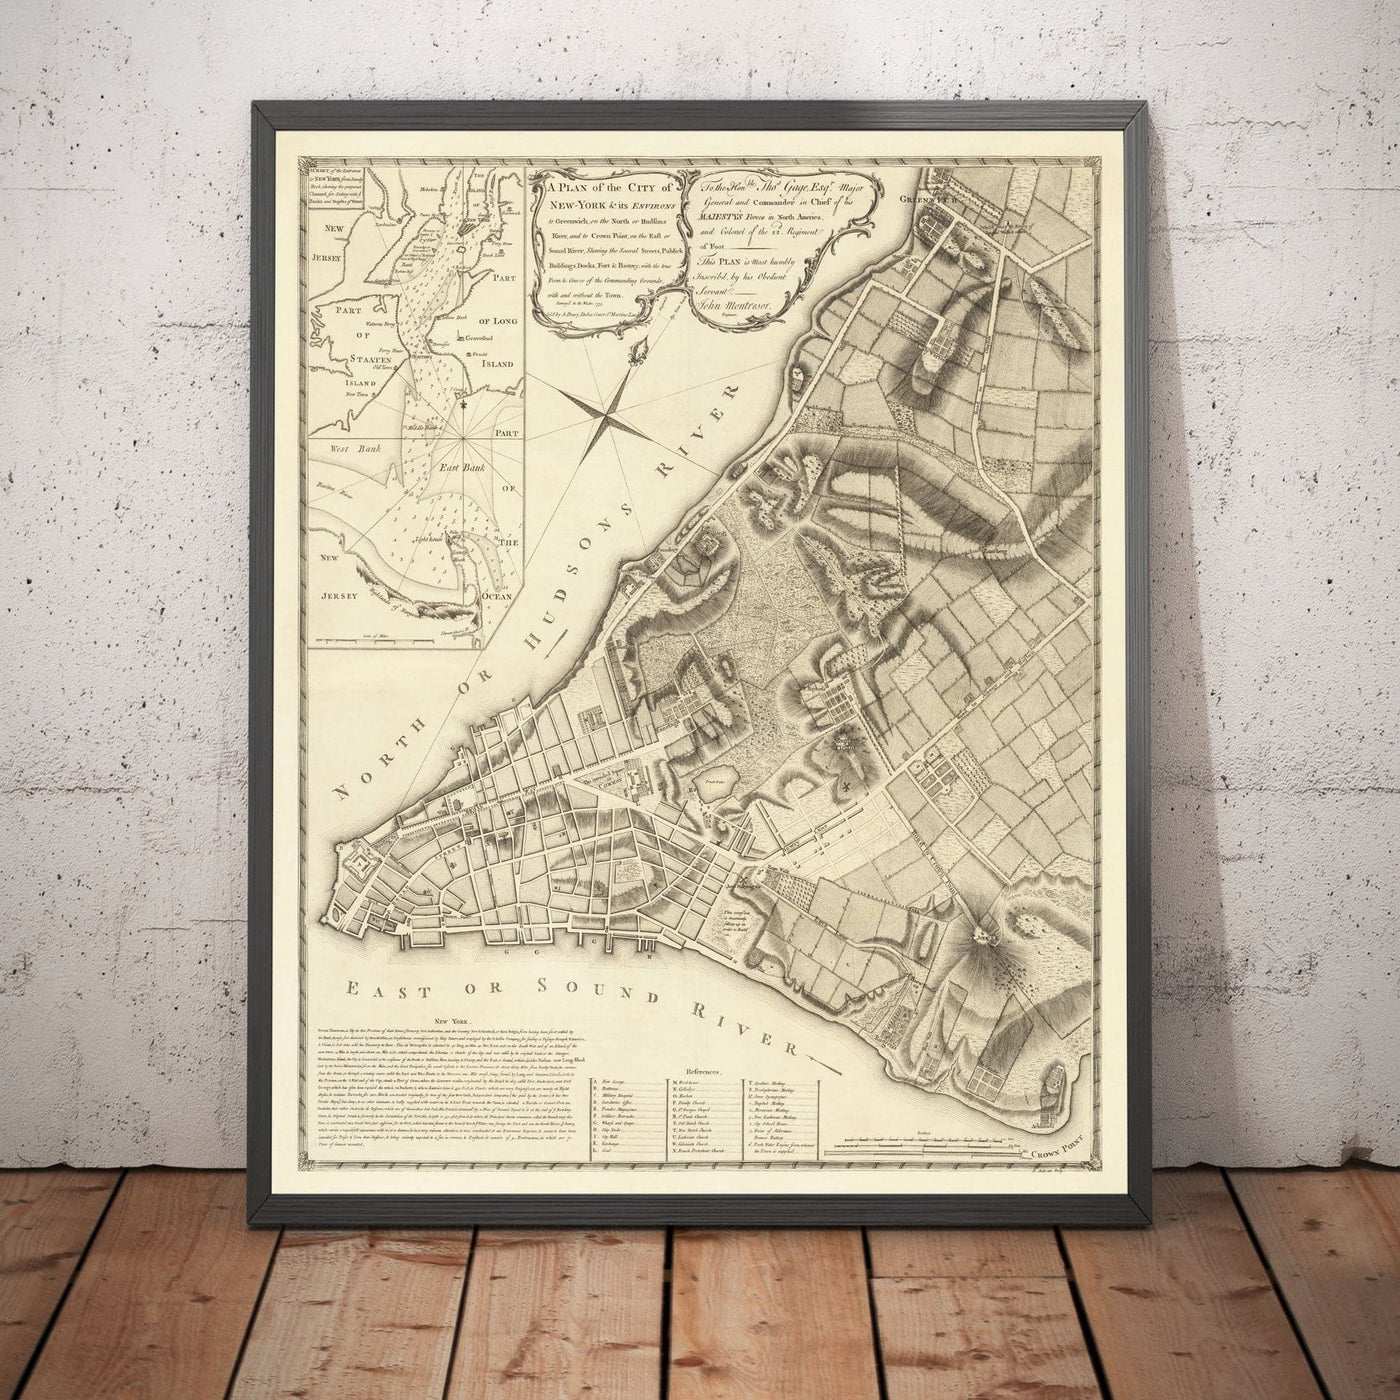 Old Map of New York in 1775 by John Rocque - Rare American Revolution War Wall Art - Greenwich, Columbia, Manhattan - British Military Plan